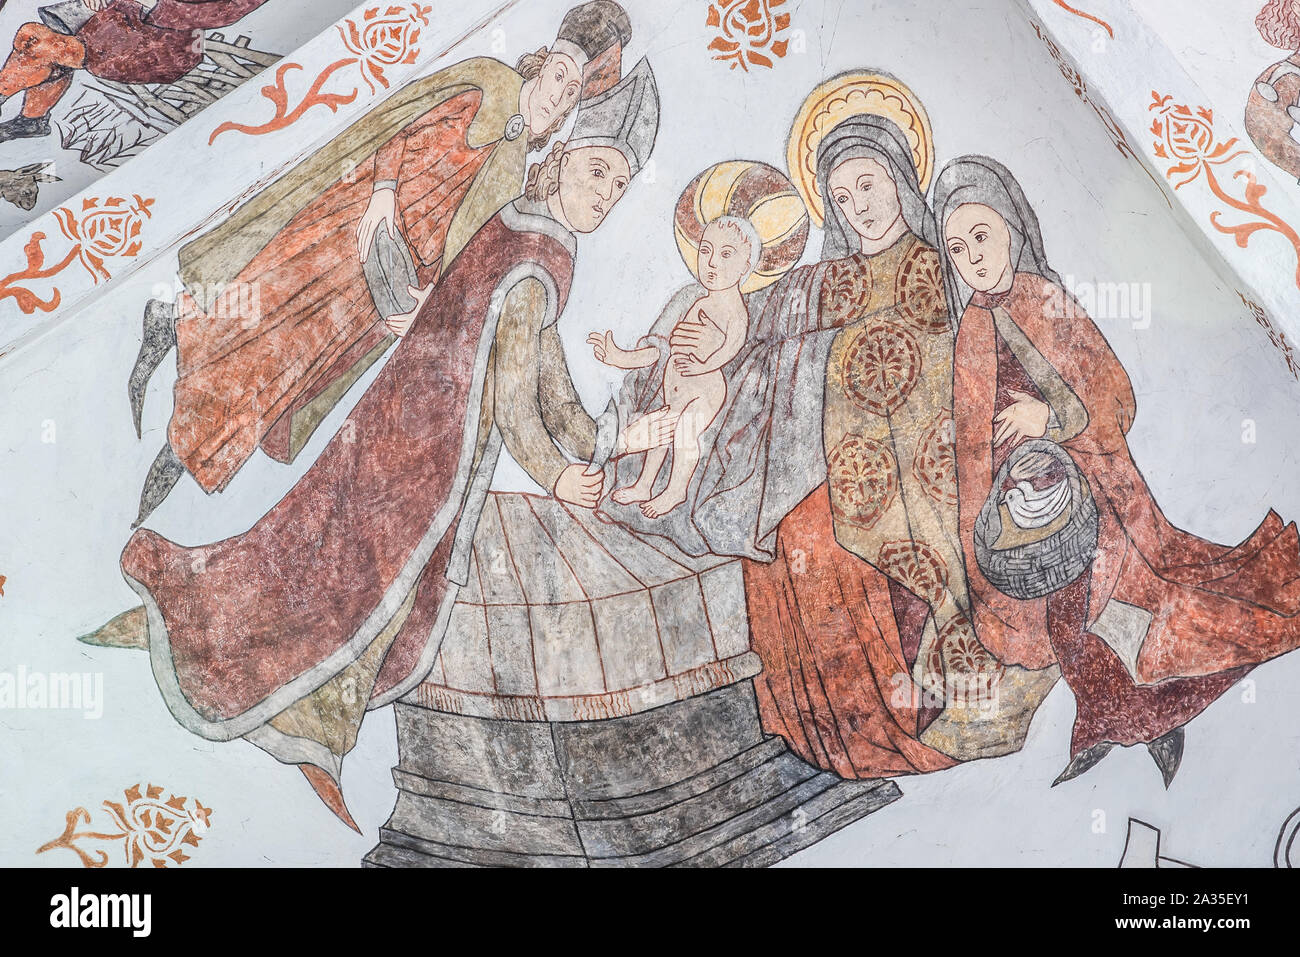 the circumcision of Jesus, a wall-painting from about the year 1500 in the church of St. Mary, Elsinore, Denmark, May 14, 2019 Stock Photo